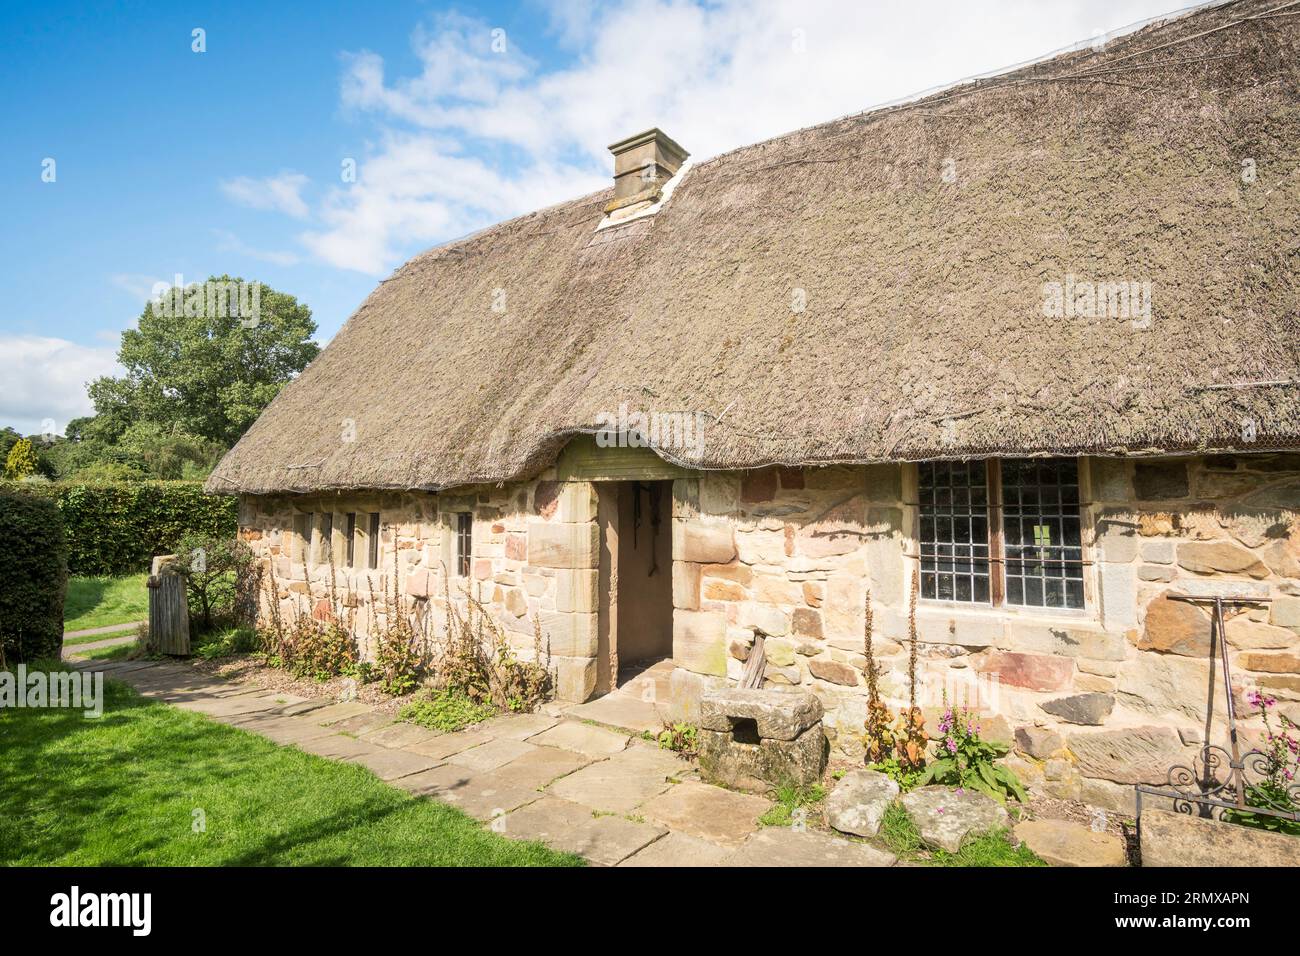 The reconstructed Stang End Long House or Cruck Cottage, Ryedale folk museum, England, UK Stock Photo